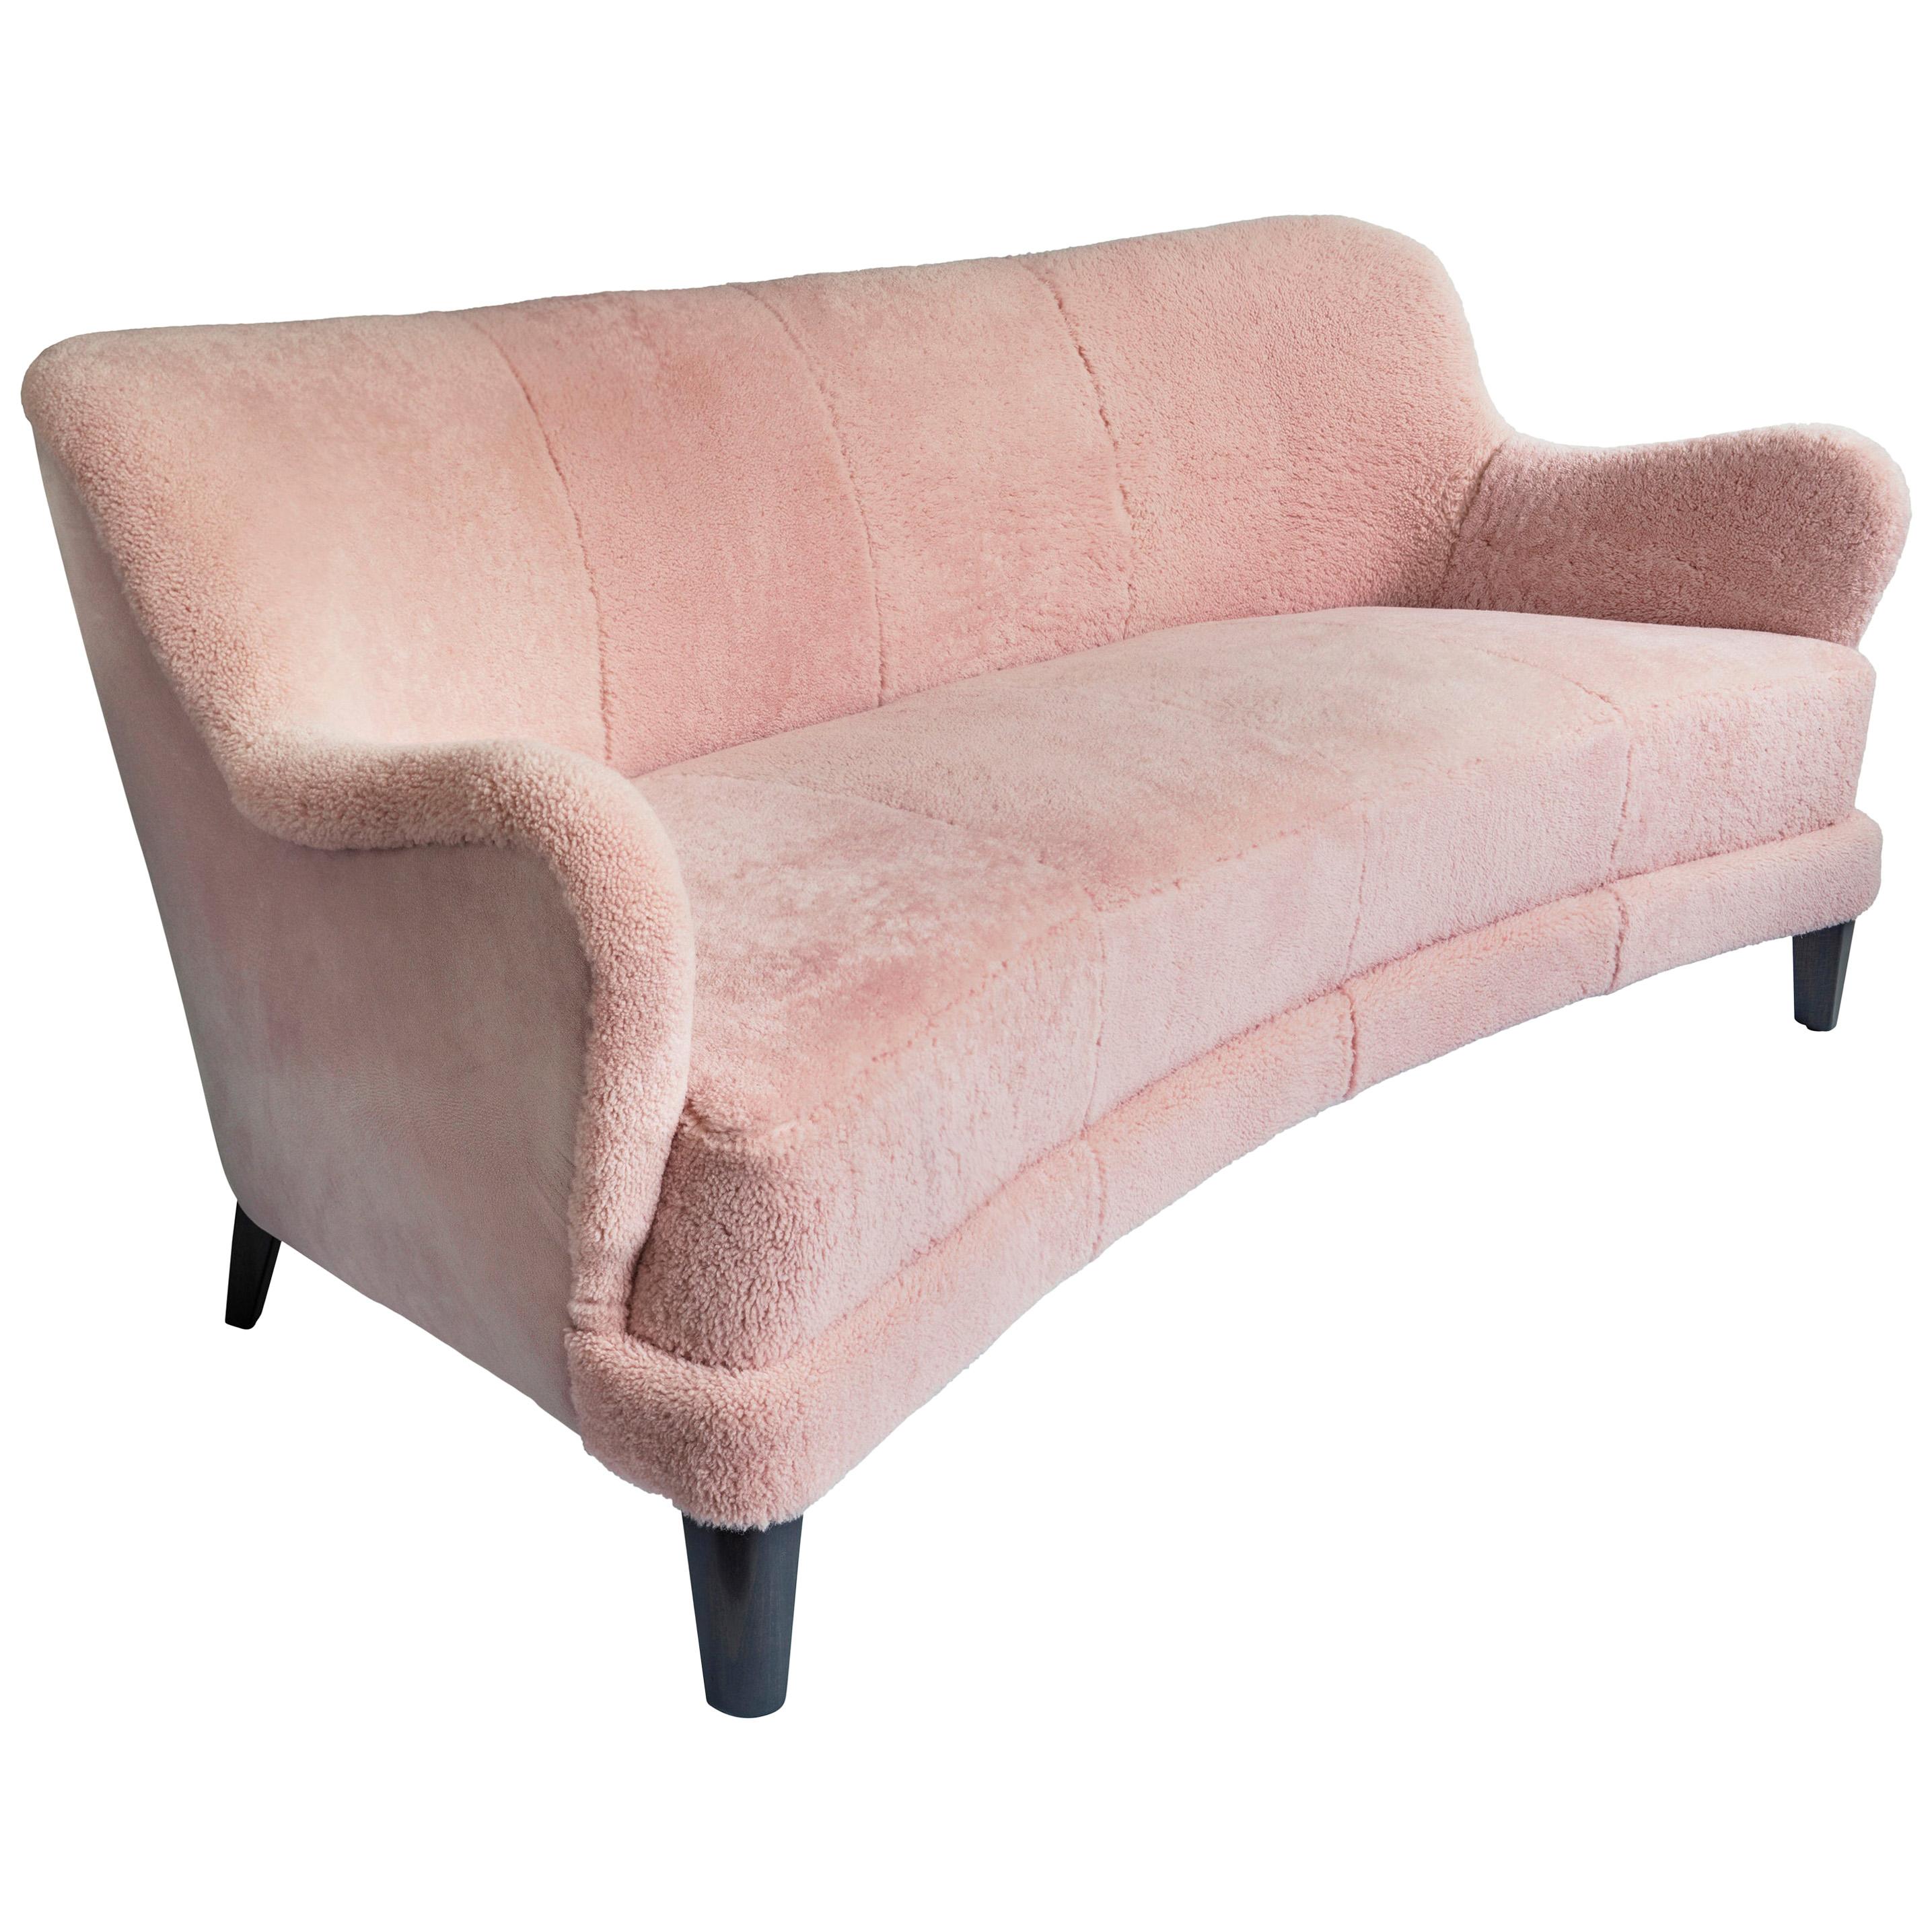 Contemporary Eclipse Curved Sofa in Pink Sheepskin and Suede Upholstery For Sale